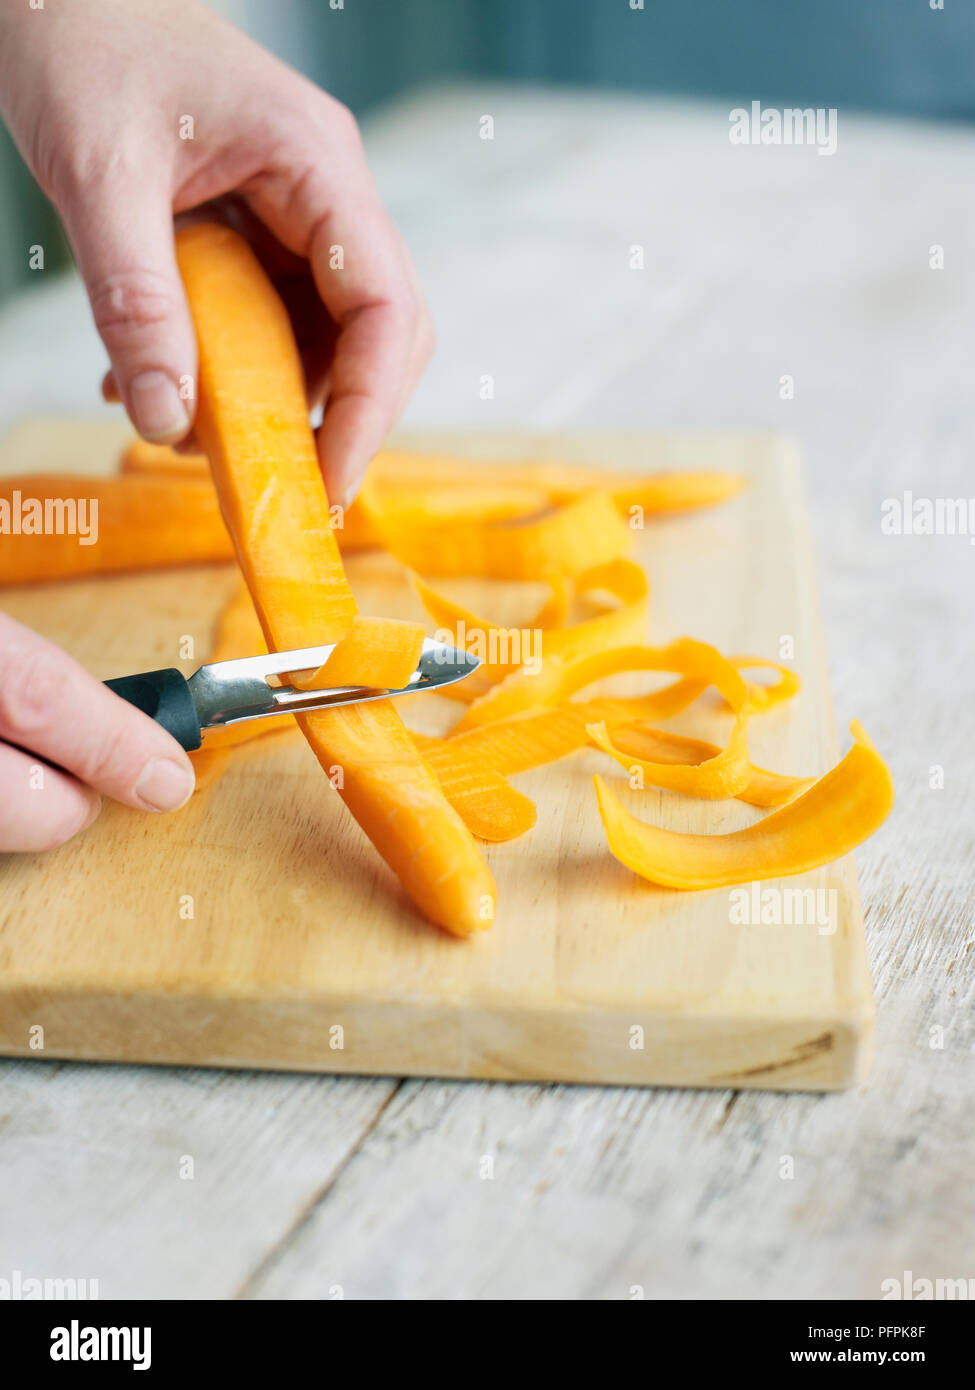 Paring carrot with vegetable peeler Stock Photo